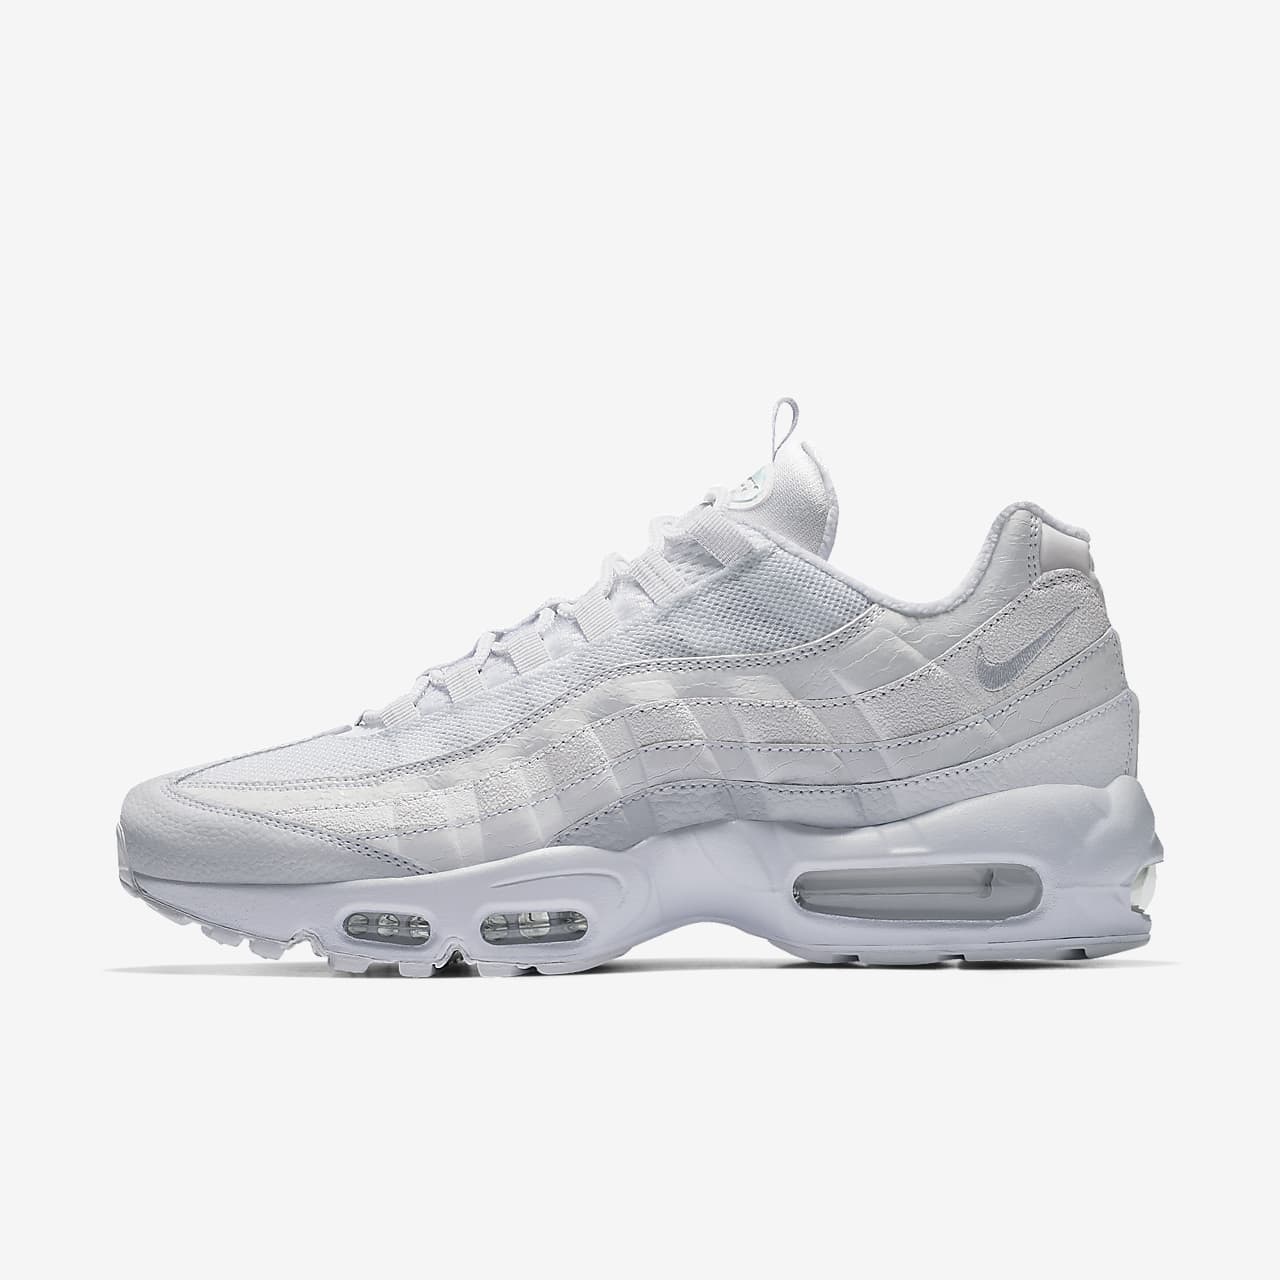 grey and white air max 95